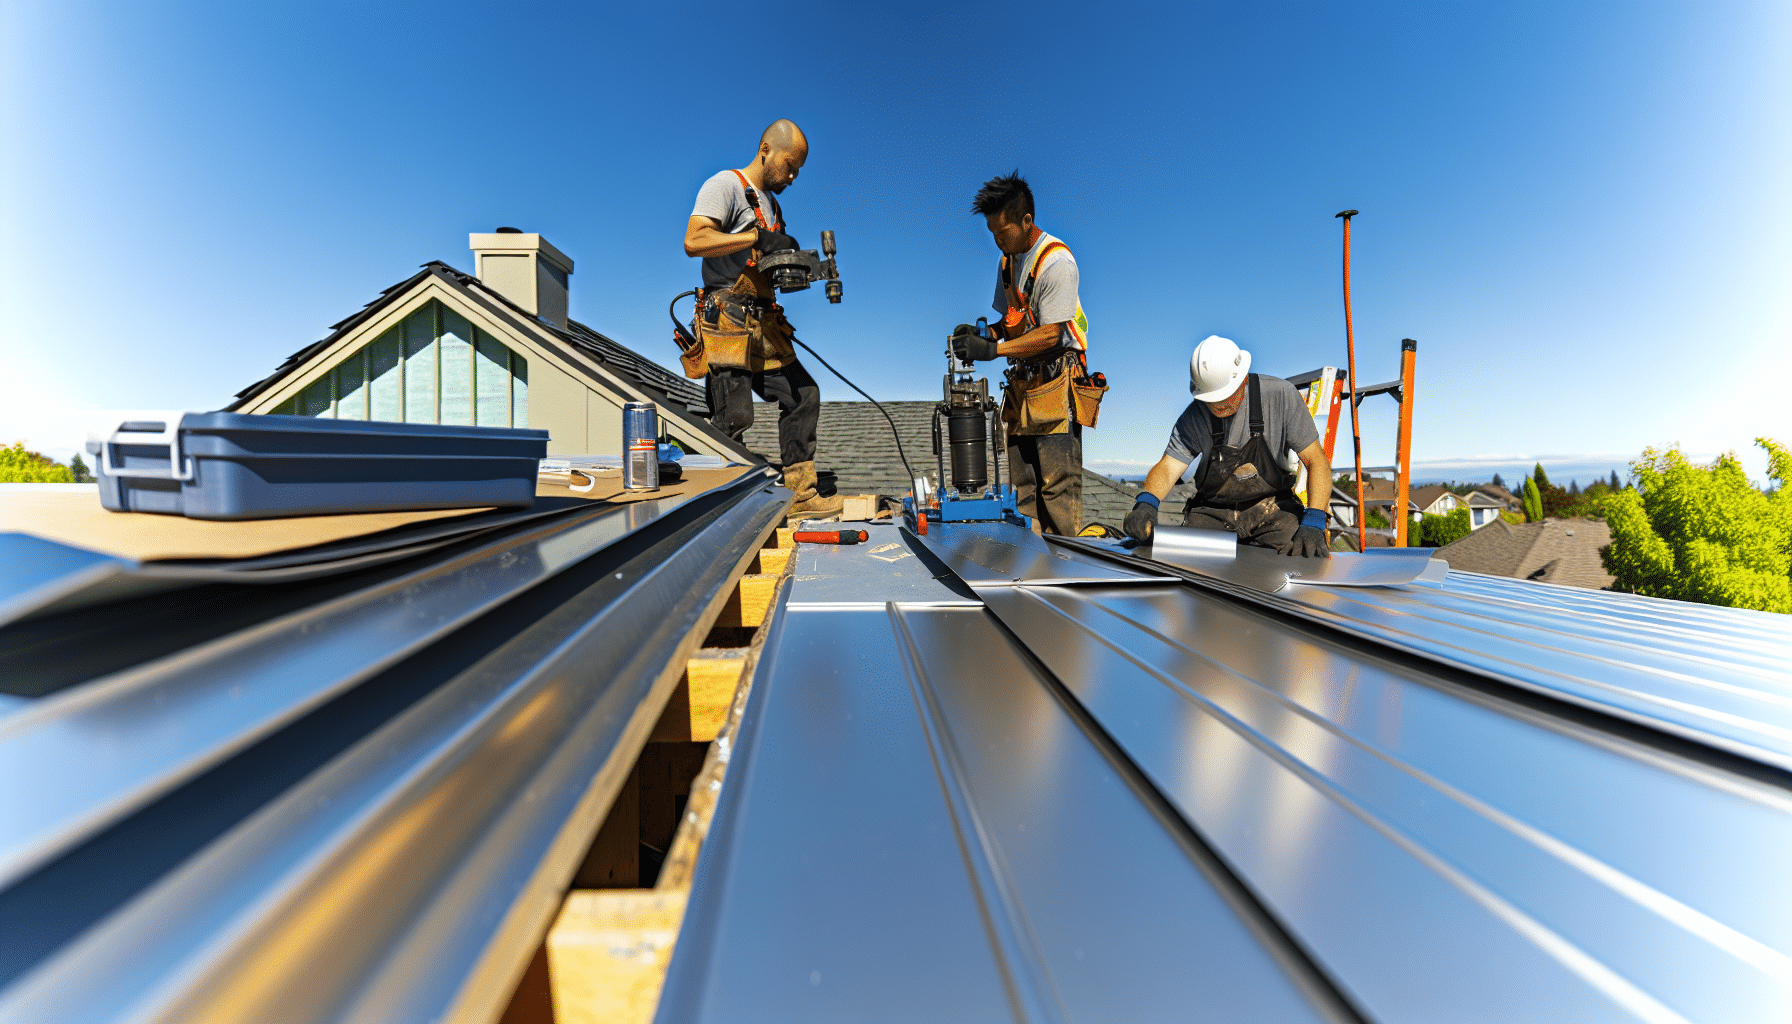 Professional contractors fabricating standing seam metal roof panels on-site